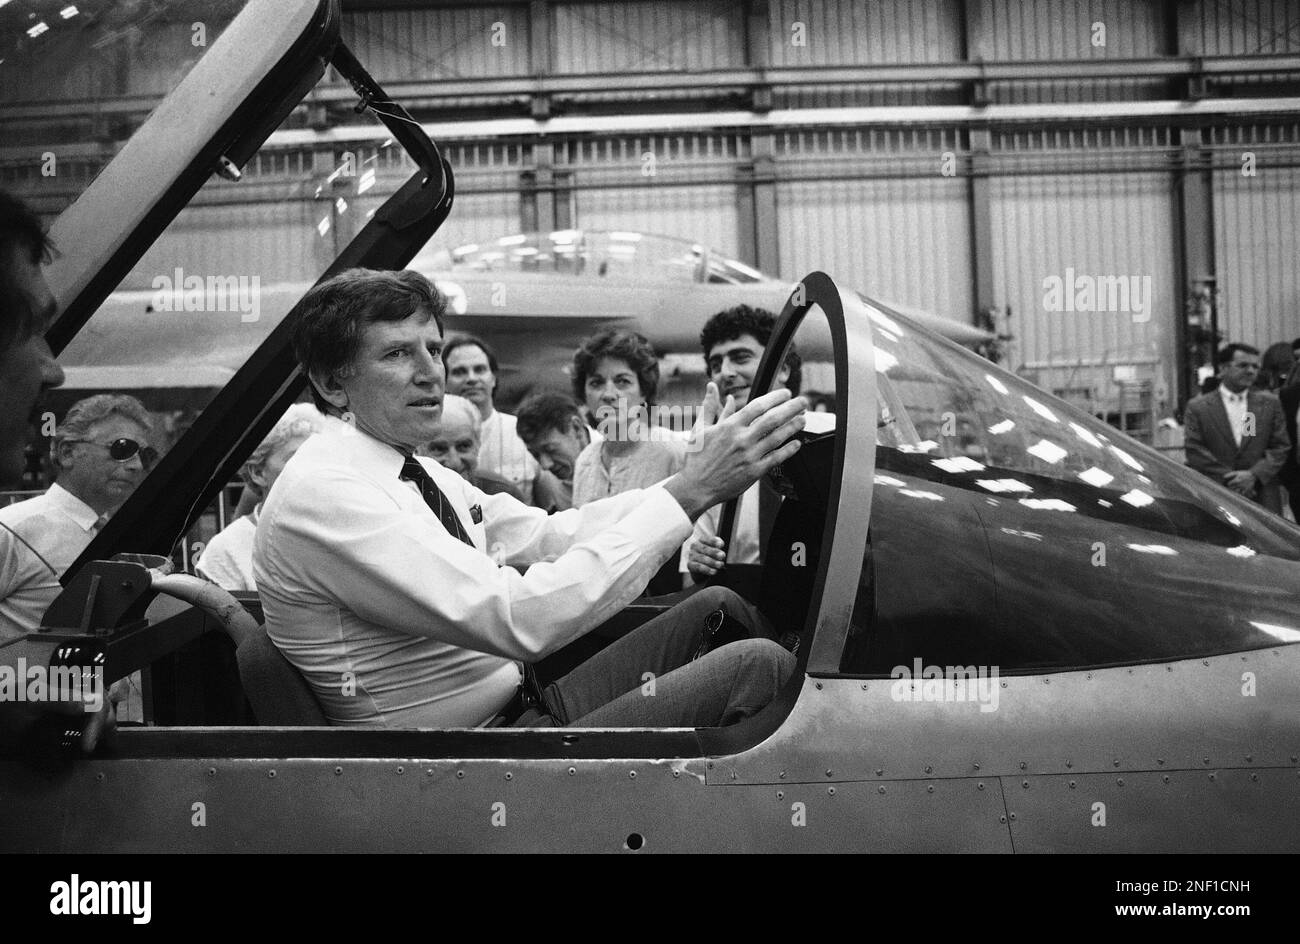 Senator Gary Hart, center, sits in the cockpit of Israel’s next generation fighter, the Lavi, during a tour of the works at the Israel Aircraft Industries plant, July 6, 1986, Tel Aviv, Israel. Next to the cockpit center is the Senator's wife Lee. (AP Photo) Stock Photo